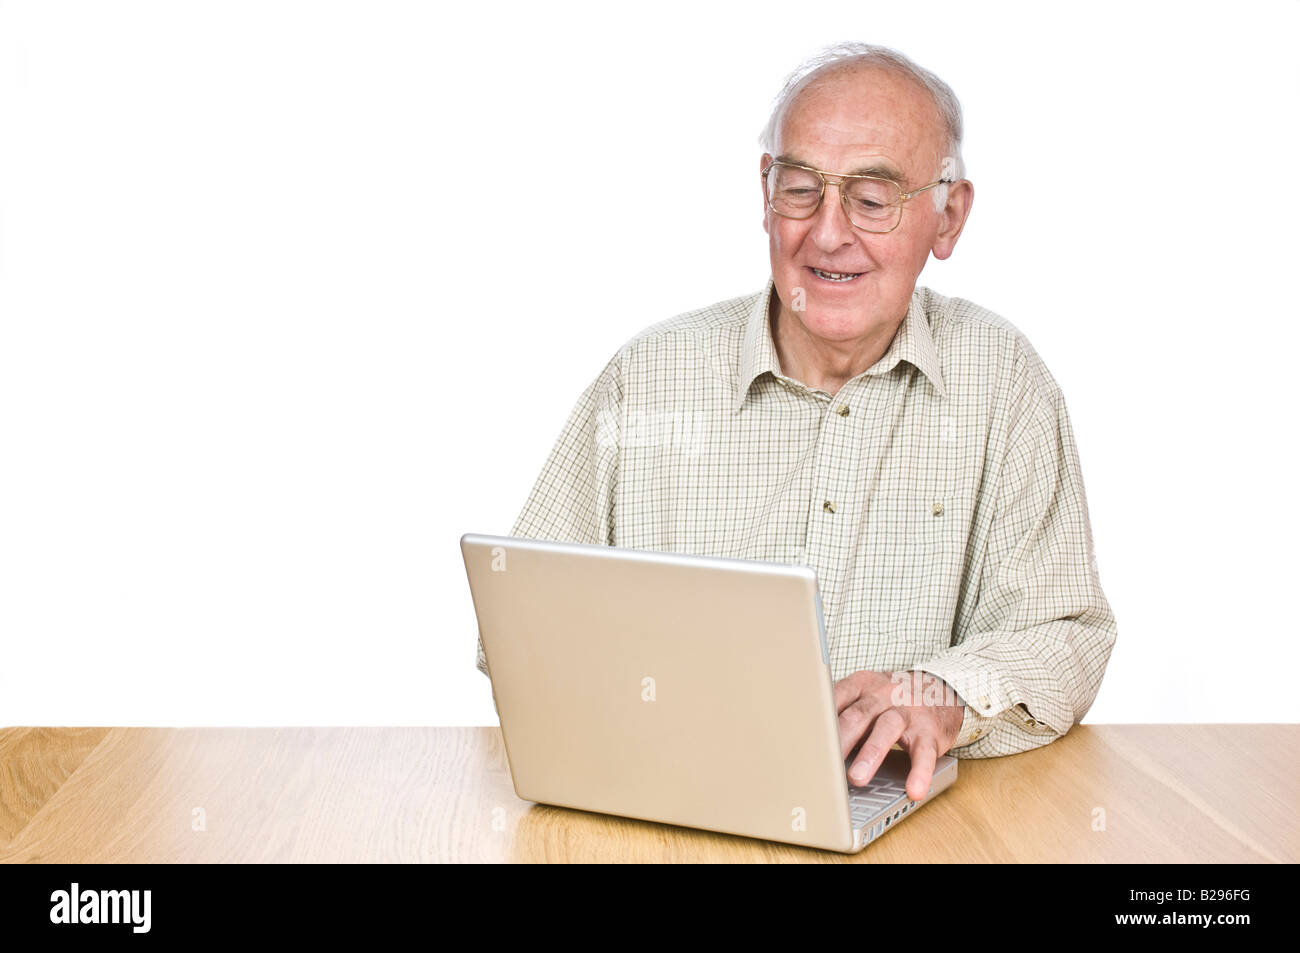 An elderly man at a desk looking at a lap top computer screen and smiling against a pure white (255) background. Stock Photo